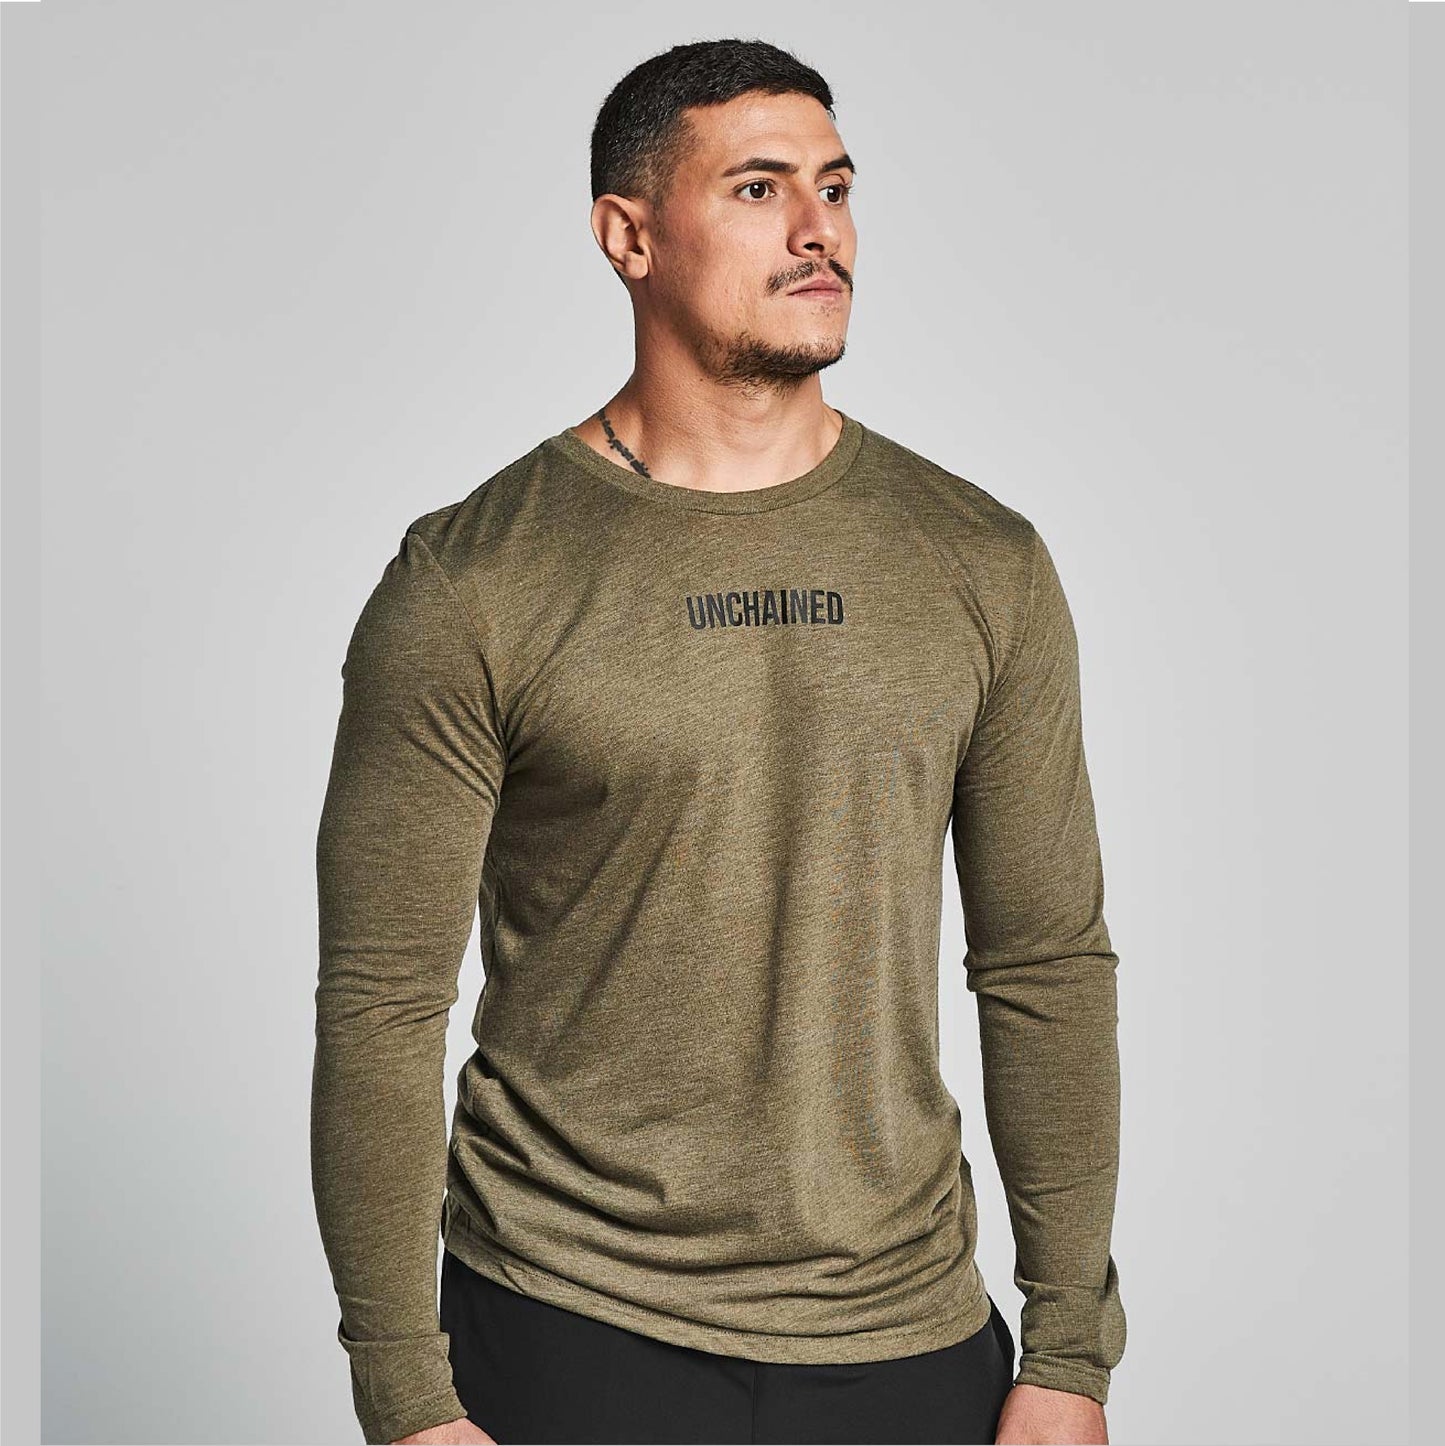 T-SHIRT MANCHES LONGUES NOMADE - MILITARY GREEN - UNCHAINED